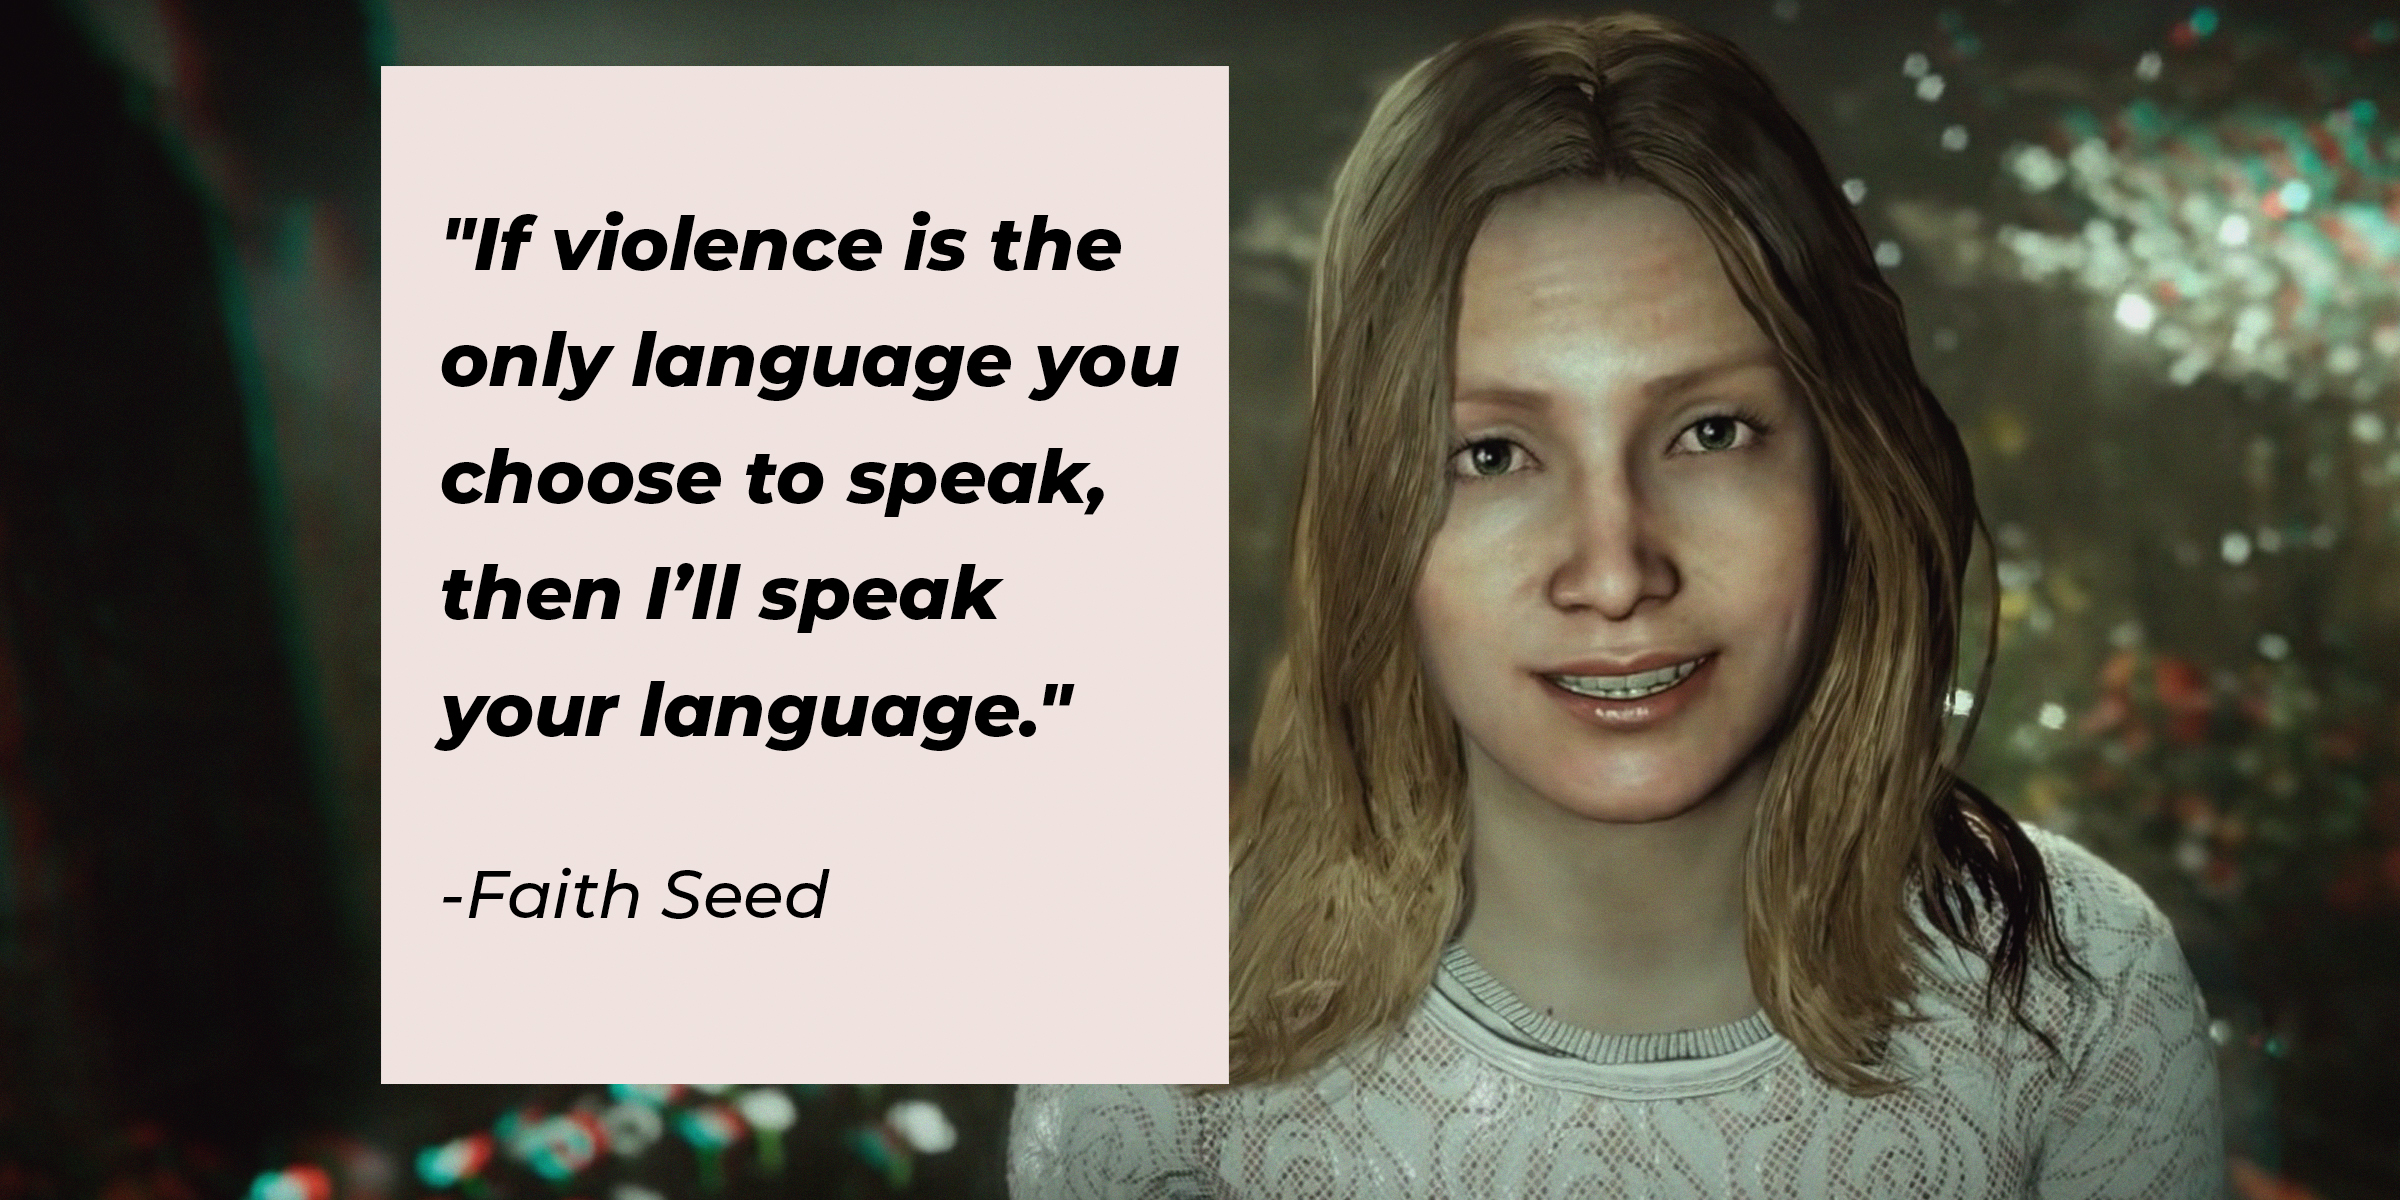 An image of Faith Seed from "Far Cry 5" with one of her quotes: "If violence is the only language you choose to speak, then I’ll speak your language." | Source: youtube.com/Ubisoft North America